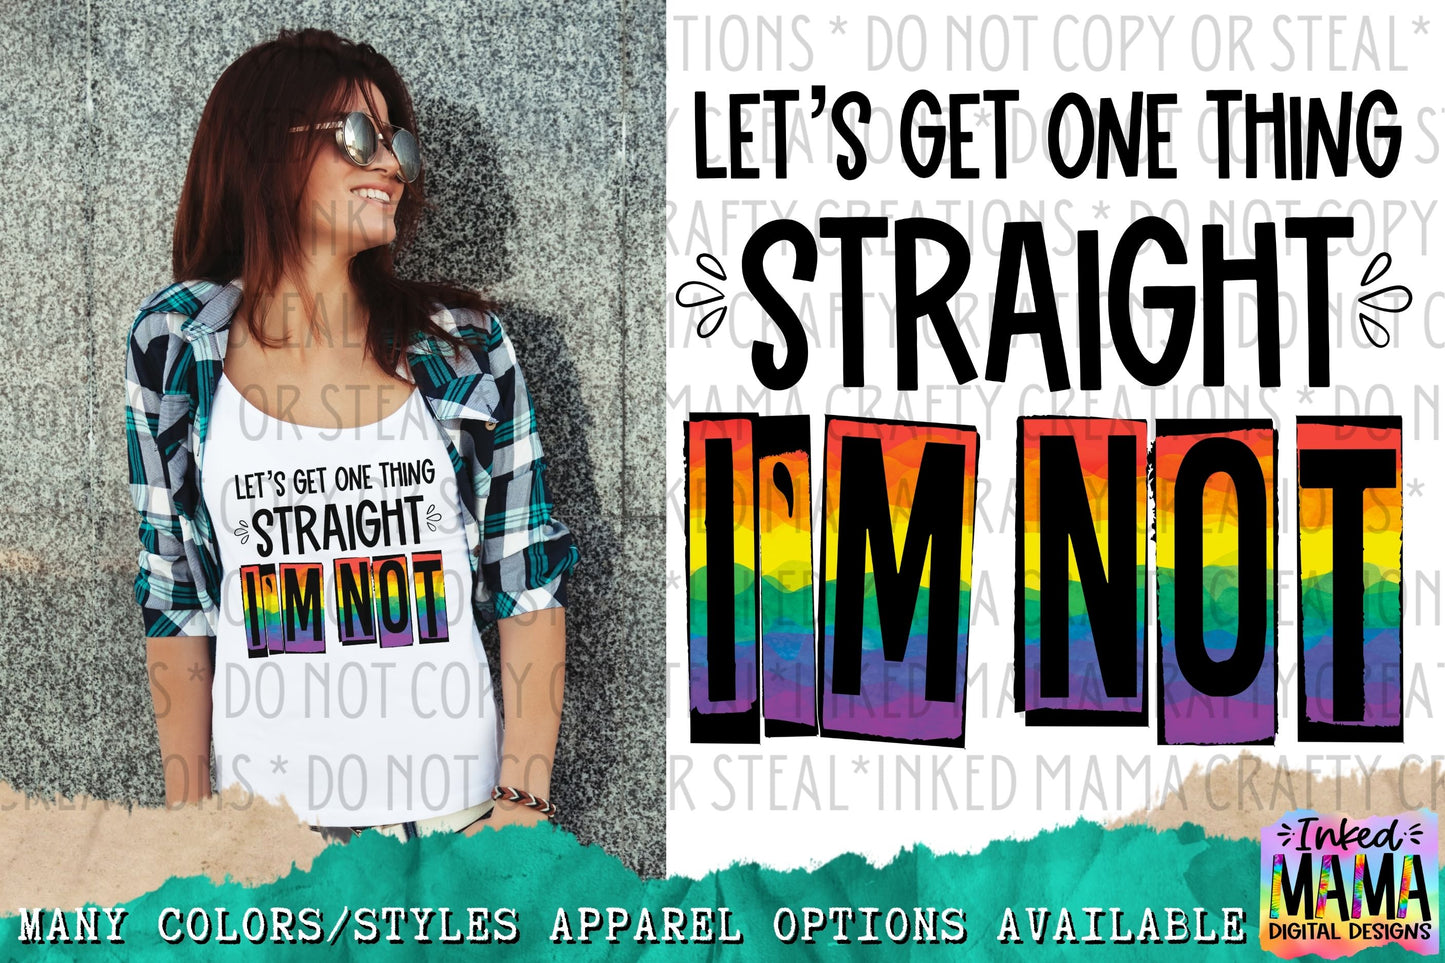 Let's get one thing straight. I'm not - LGBTQIA+ PRIDE Apparel